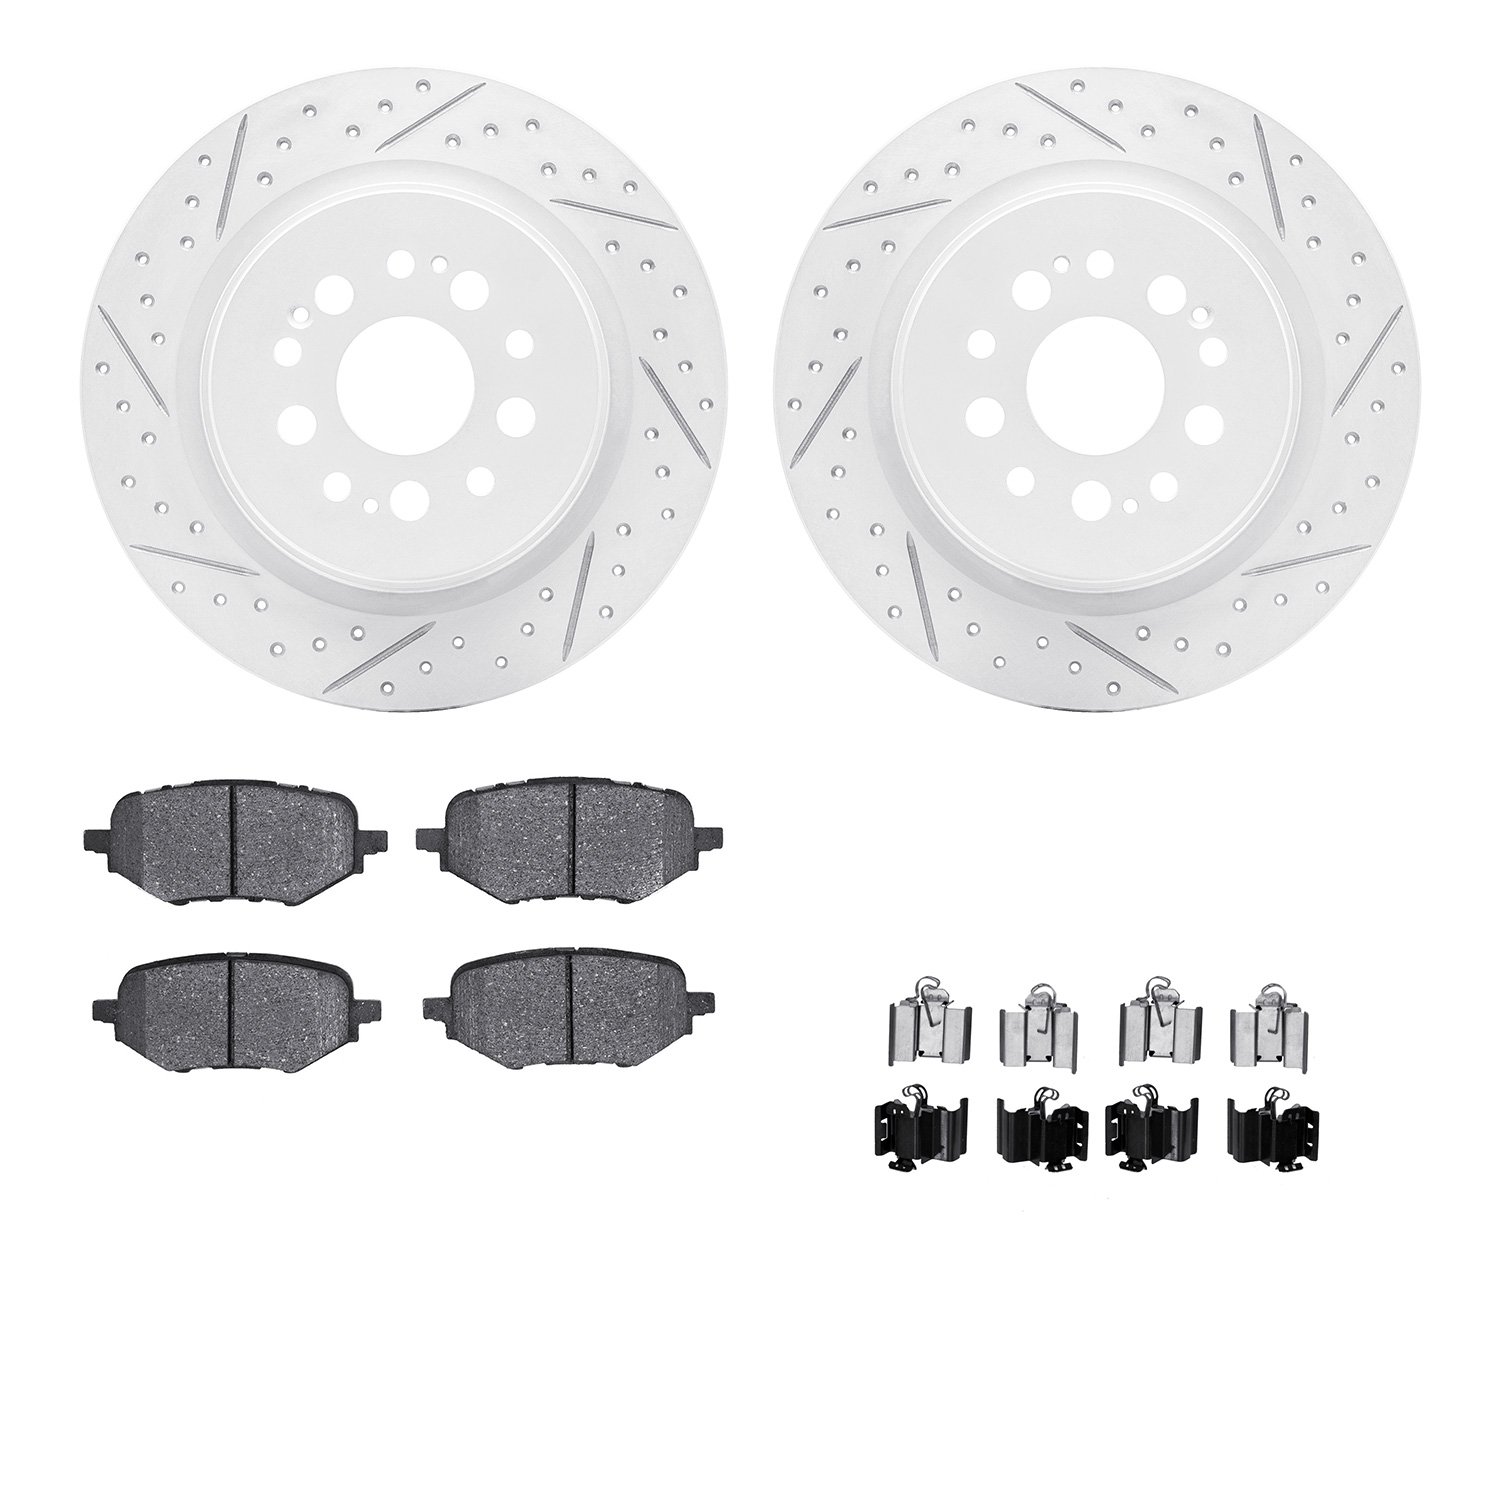 2512-59109 Geoperformance Drilled/Slotted Rotors w/5000 Advanced Brake Pads Kit & Hardware, Fits Select Acura/Honda, Position: R